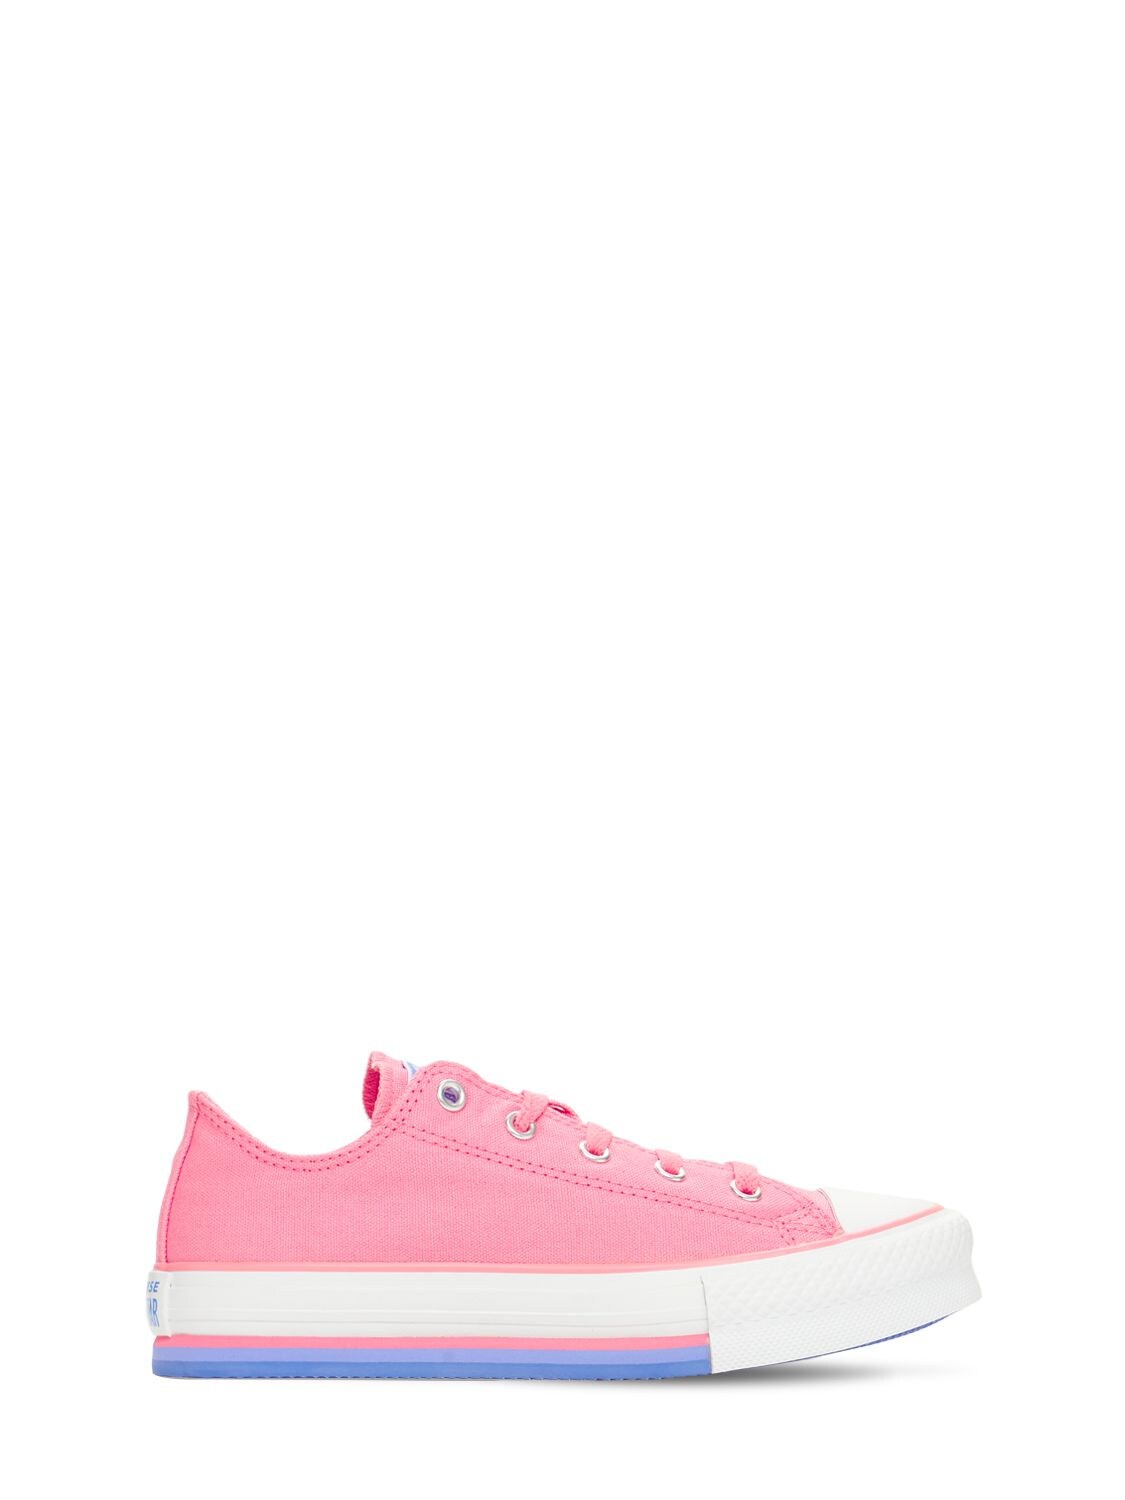 Converse Kids' Chuck Taylor All Star Lifted Pink Low Top Sneaker